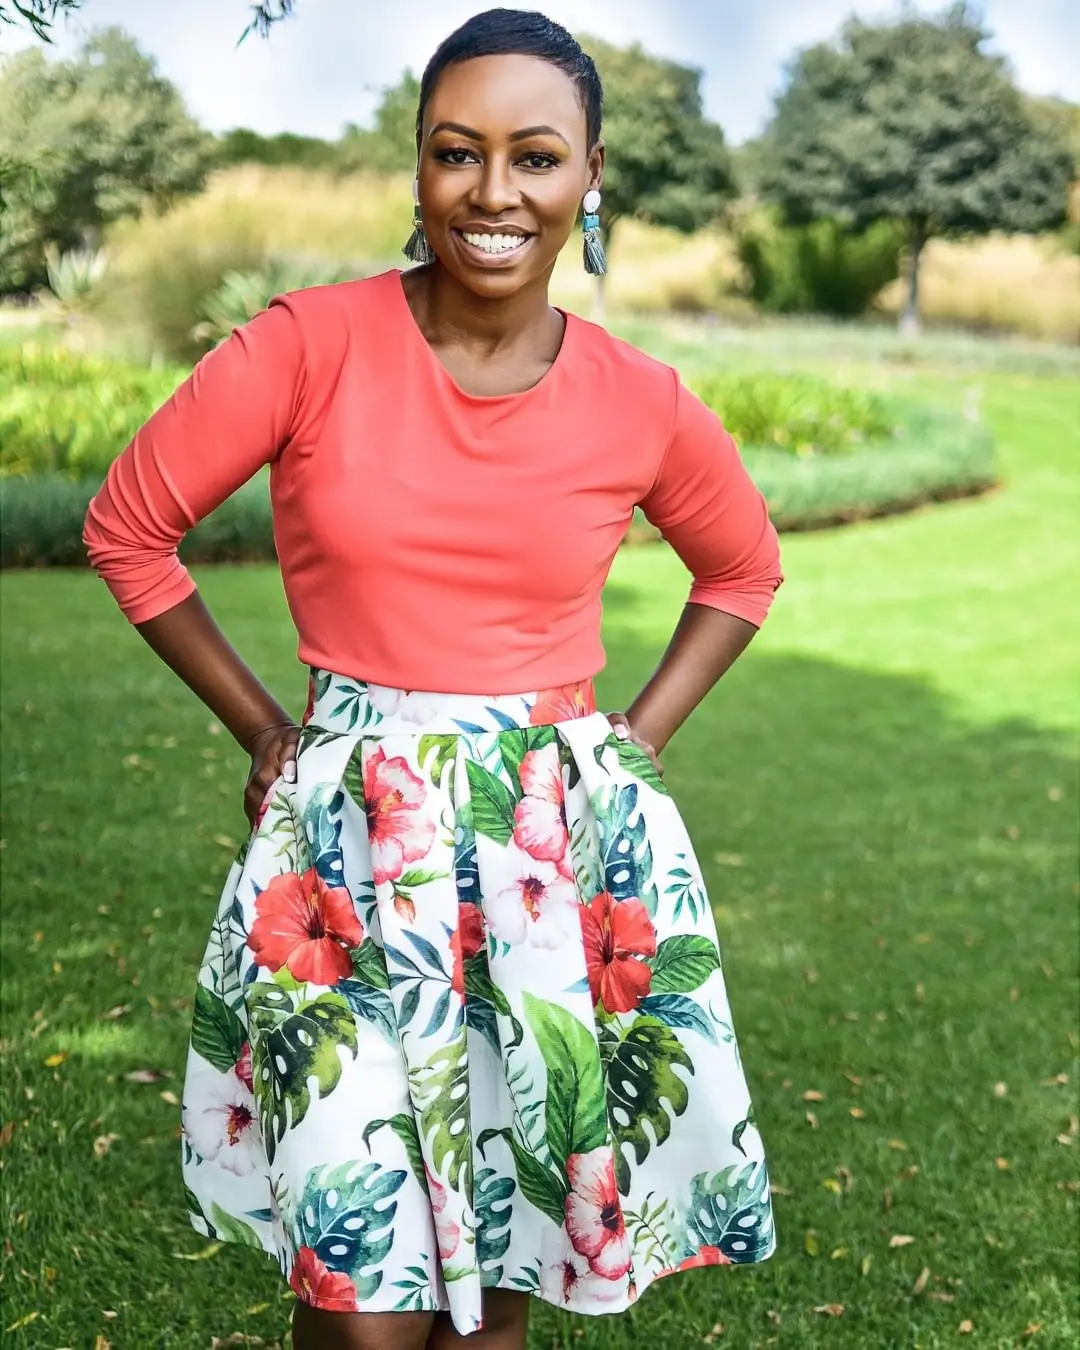 Elana Afrika-Bredenkamp excited to launch new podcast